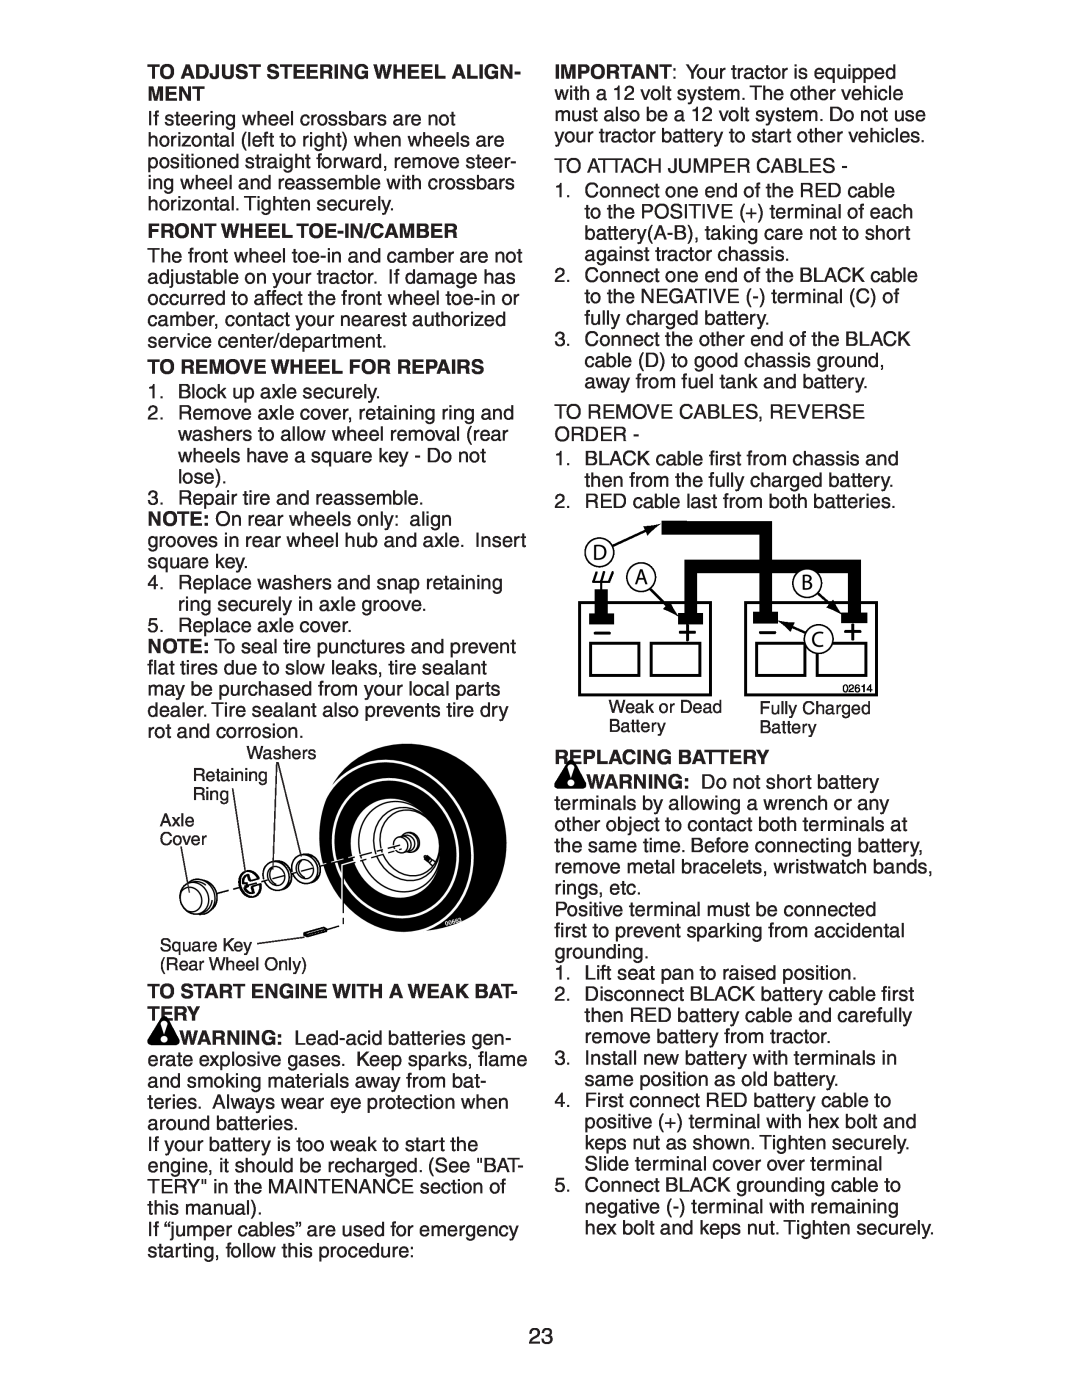 Poulan 271491 manual To Adjust Steering Wheel Align- Ment, Front Wheel Toe-In/Camber, To Remove Wheel For Repairs 